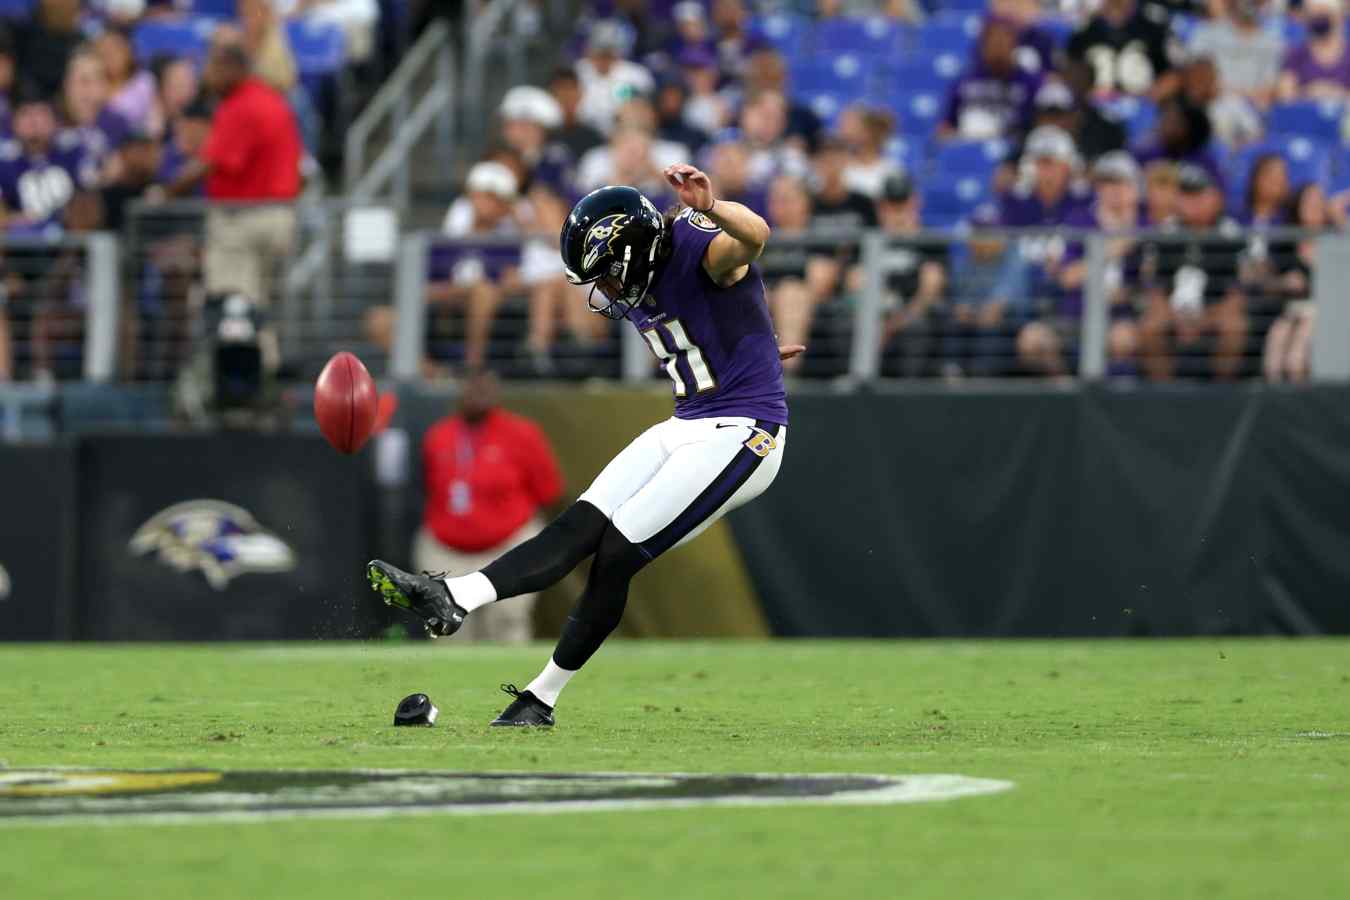 Ravens Rookie Punter is a Weapon with AllPro Potential